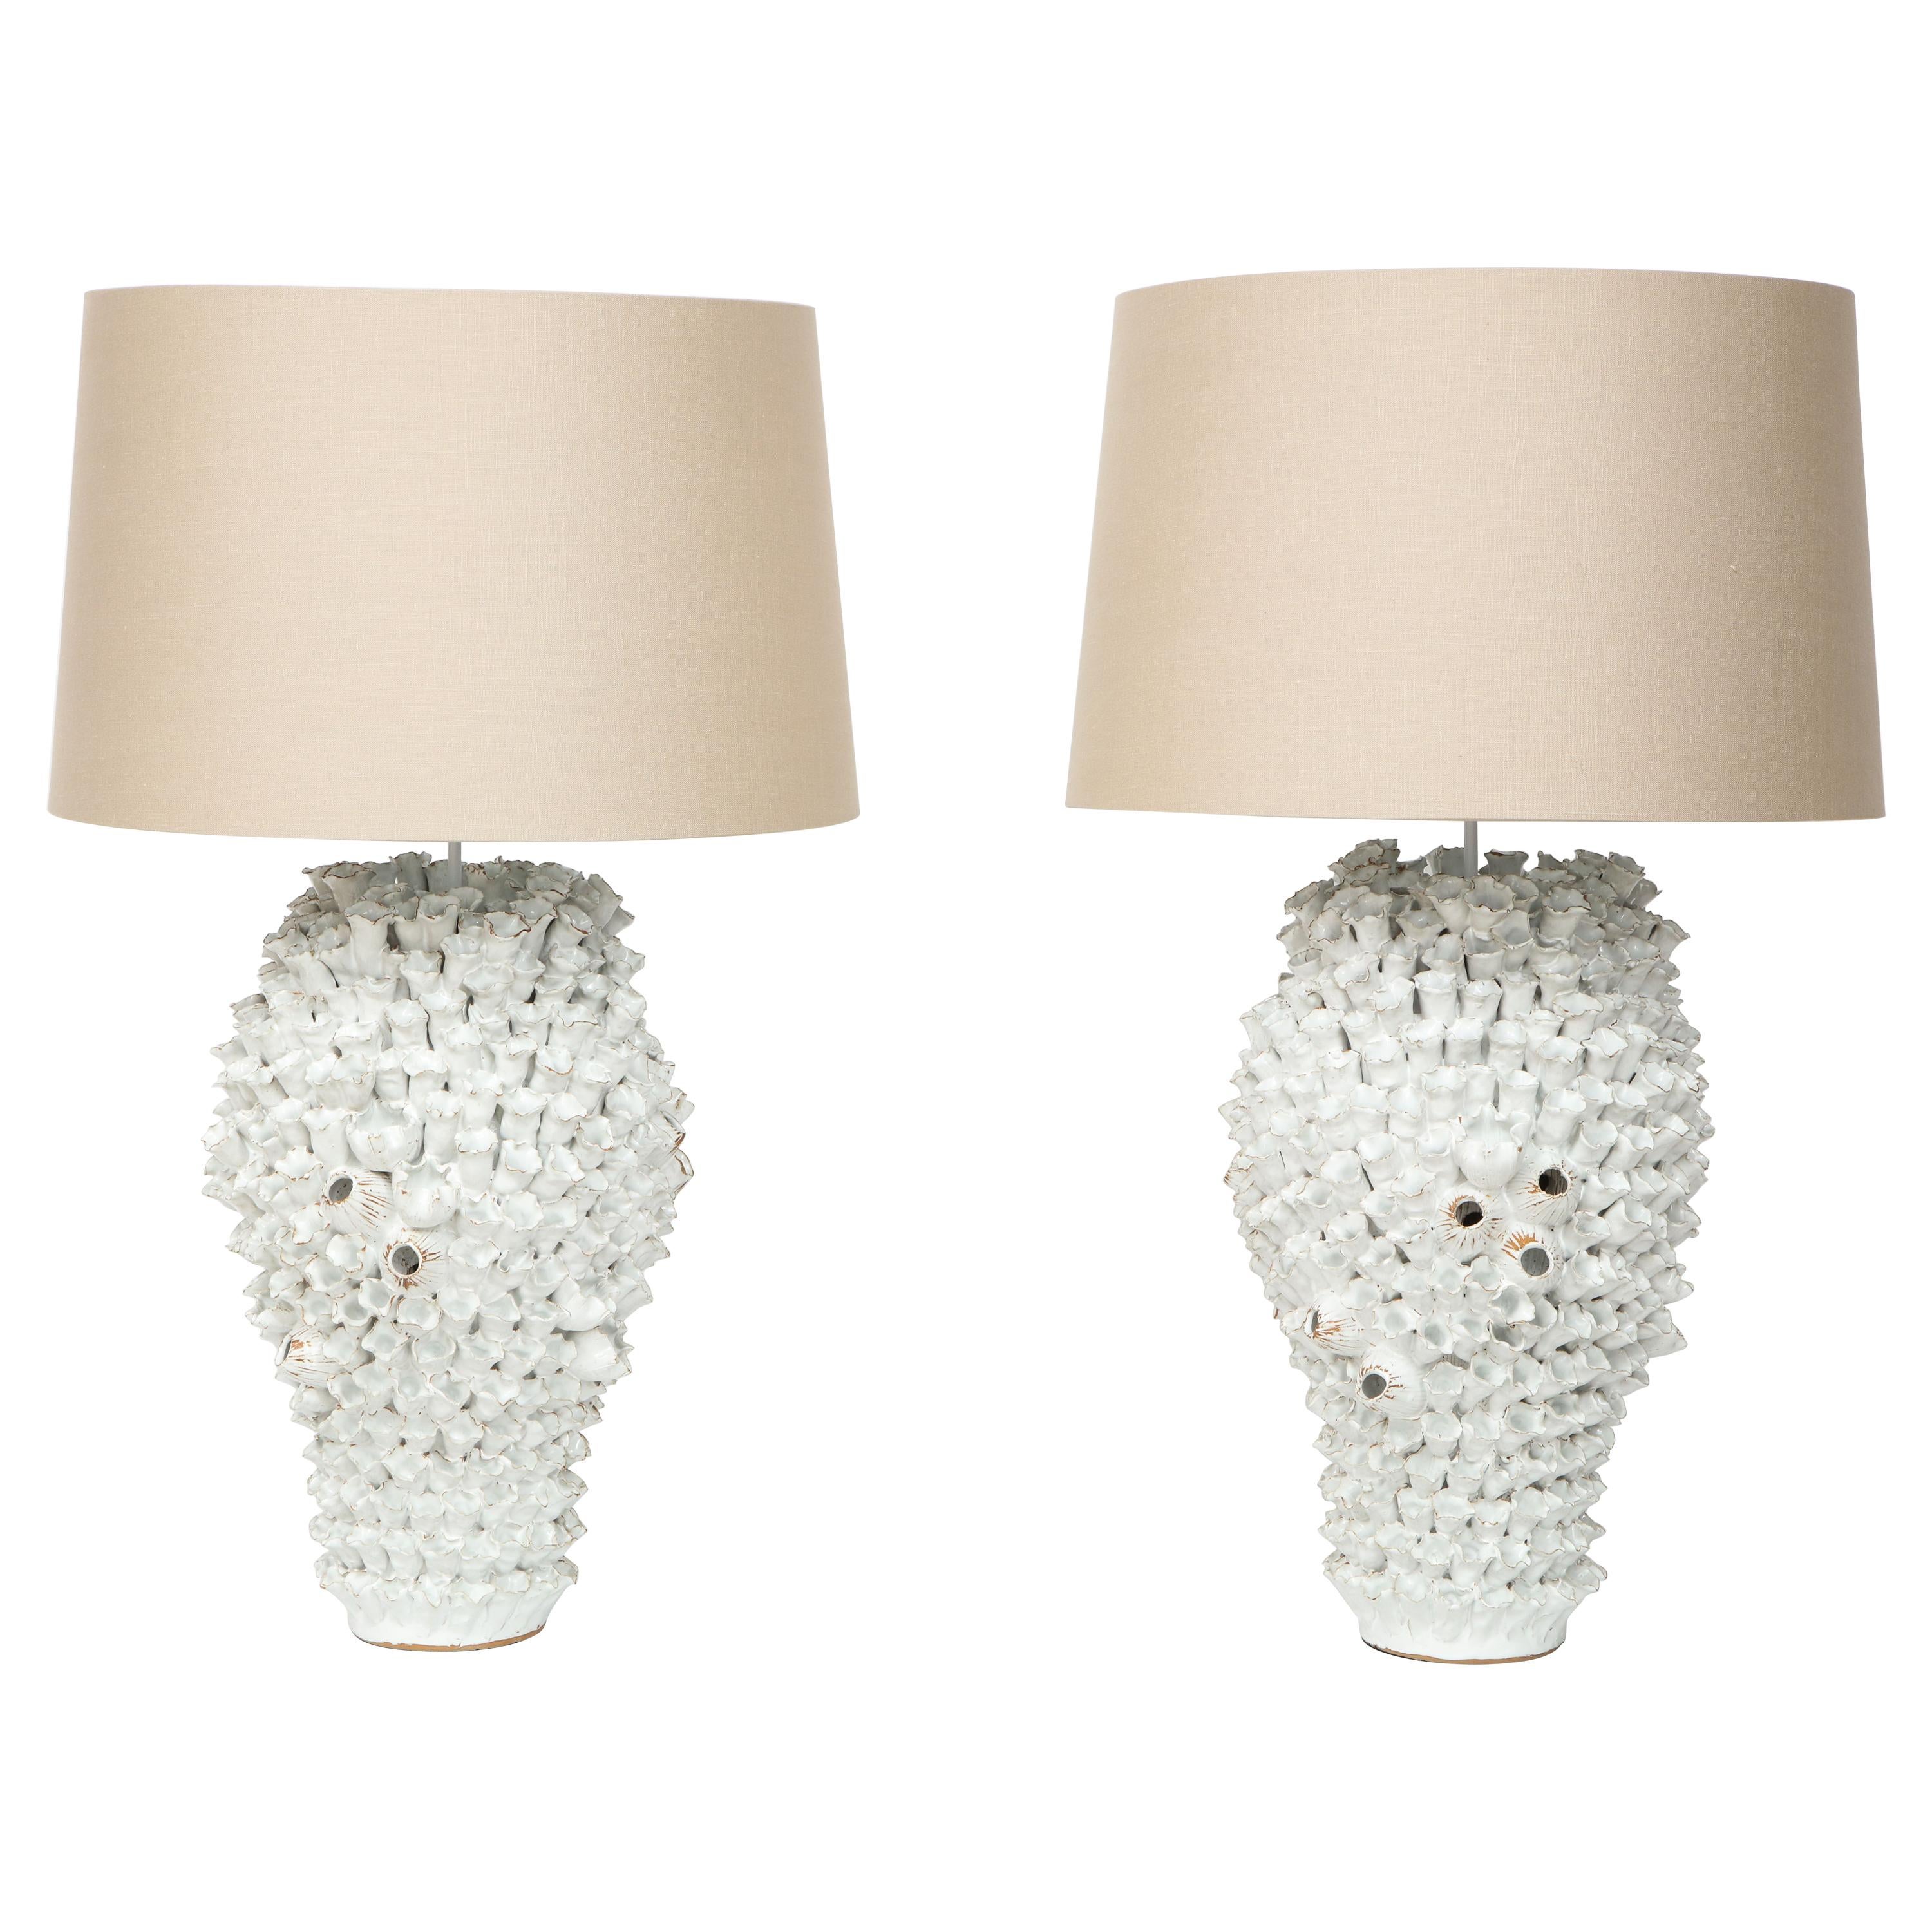 Pair of Coral Ceramic Table Lamps, in Stock